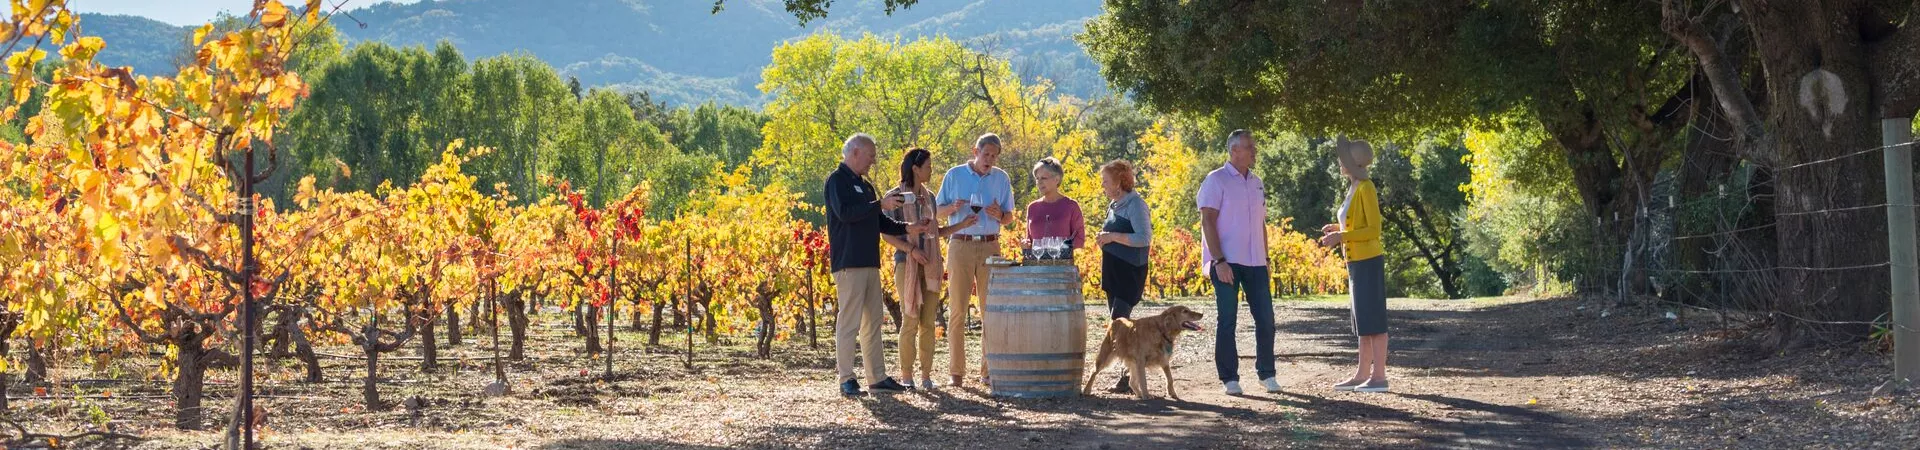 A group sip wine in a sunny vineyard with a dog